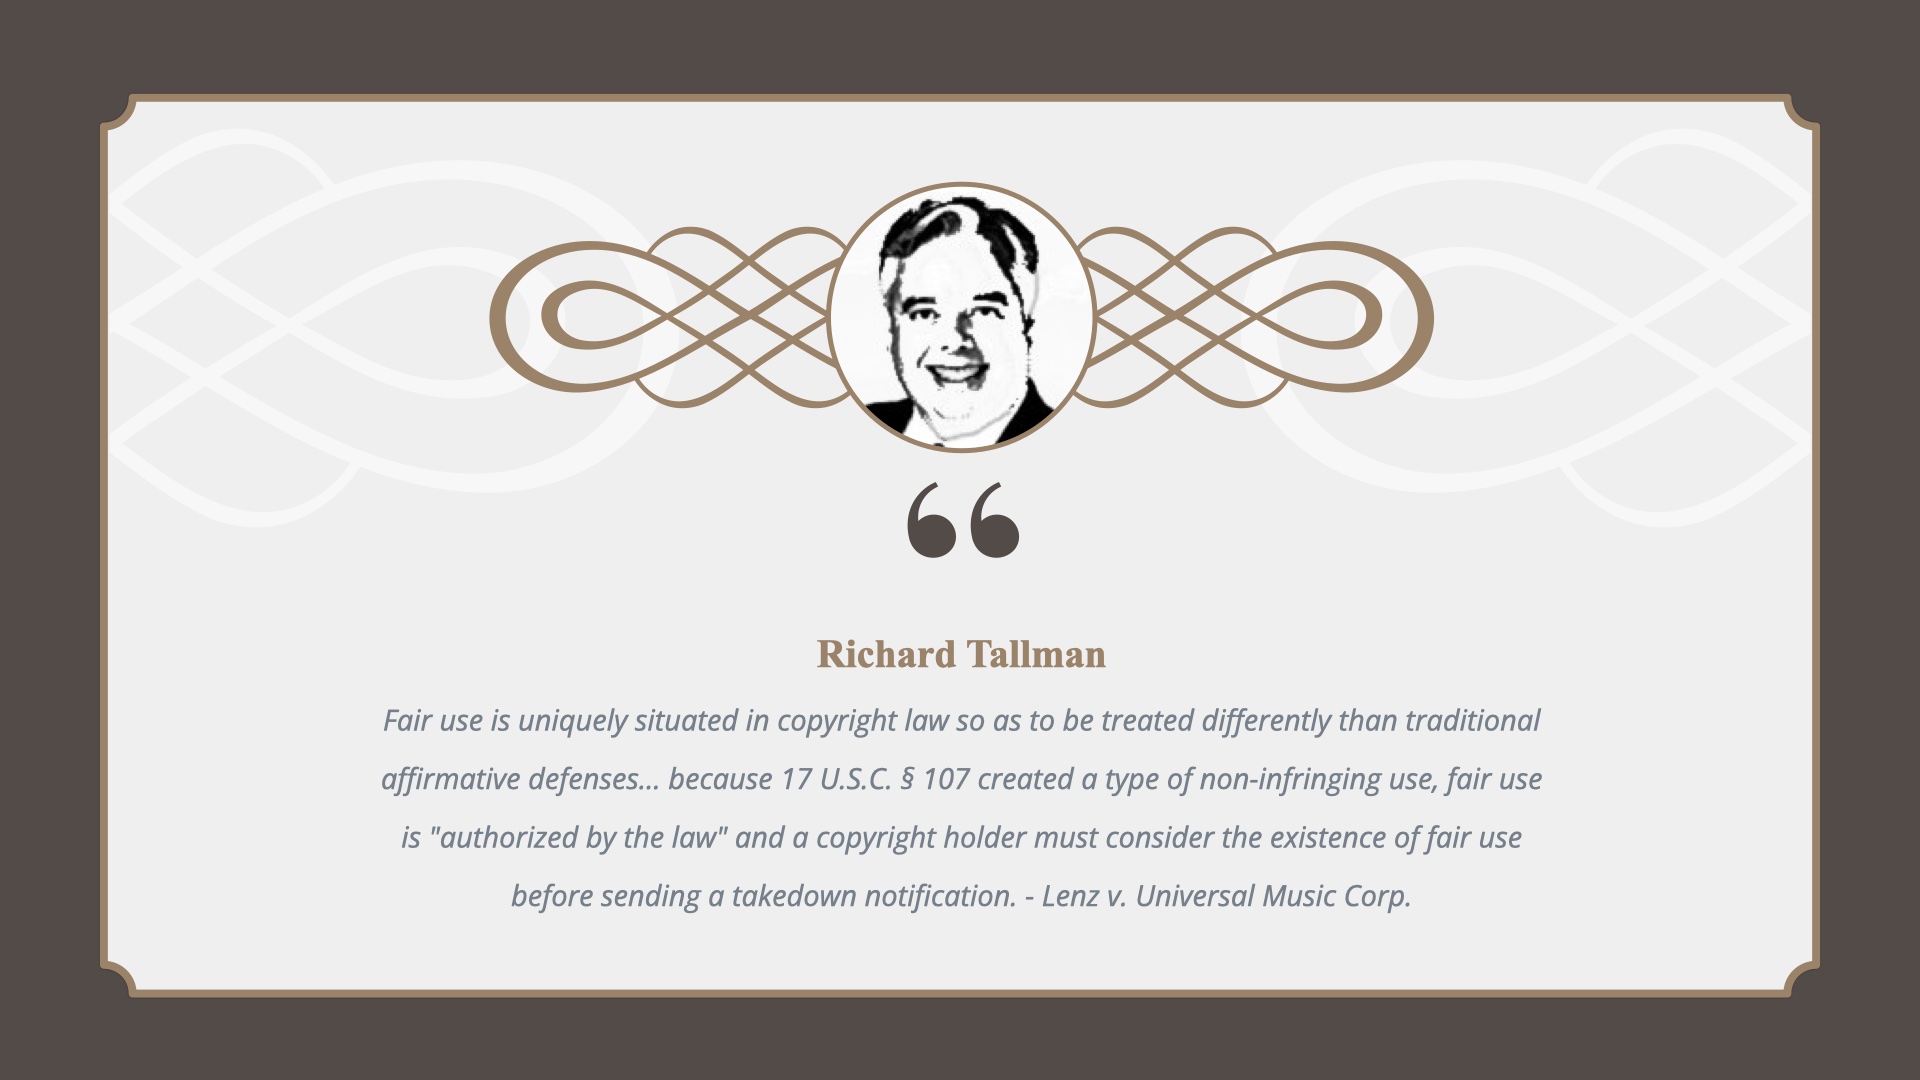 Small headshot of Richard Tallman with quote: Fair use is uniquely situated in copyright law so as to be treated differently than traditional affirmative defenses... because 17 U.S.C. § 107 created a type of non-infringing use, fair use is 